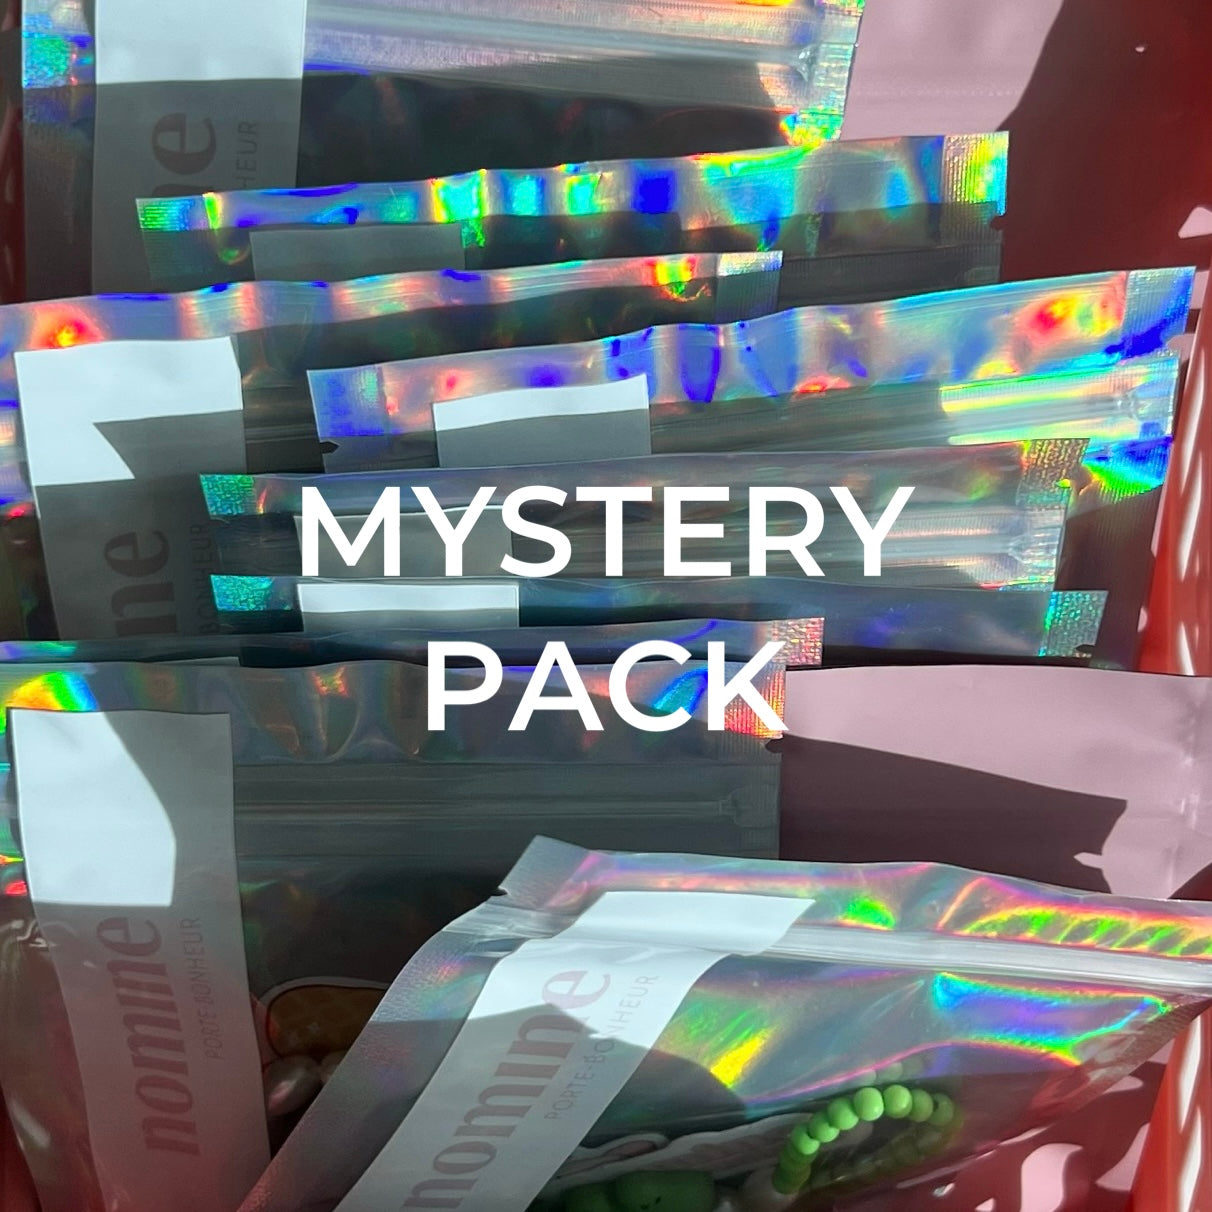 MYSTERY PACK